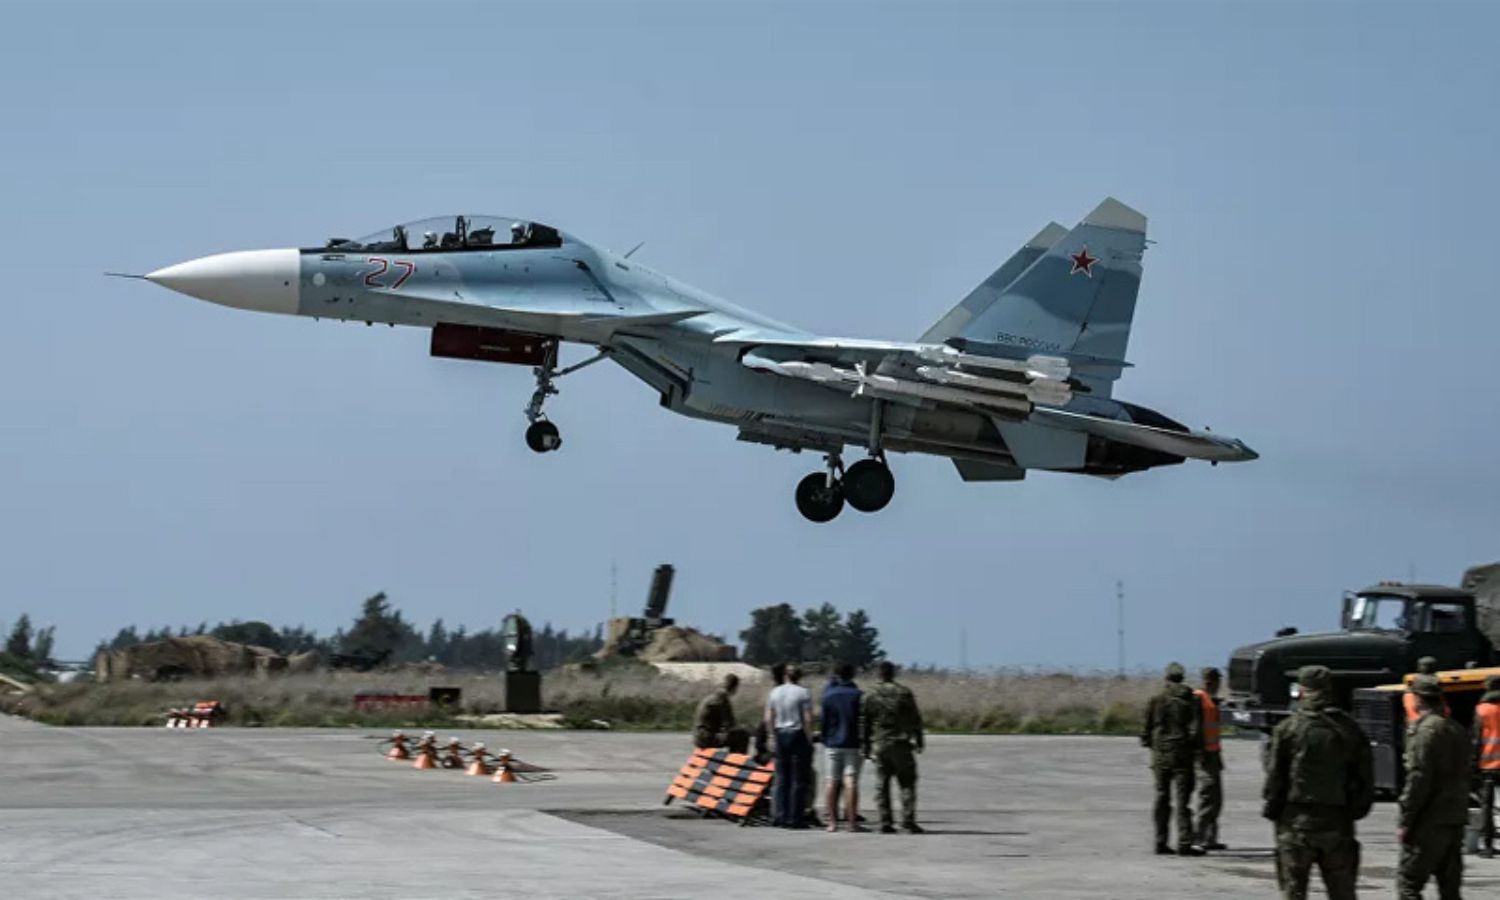 A Russian-made Sukhoi Su-24 aircraft takes off from Russia’s Hmeimim base in the Syrian province of Latakia (Sputnik)